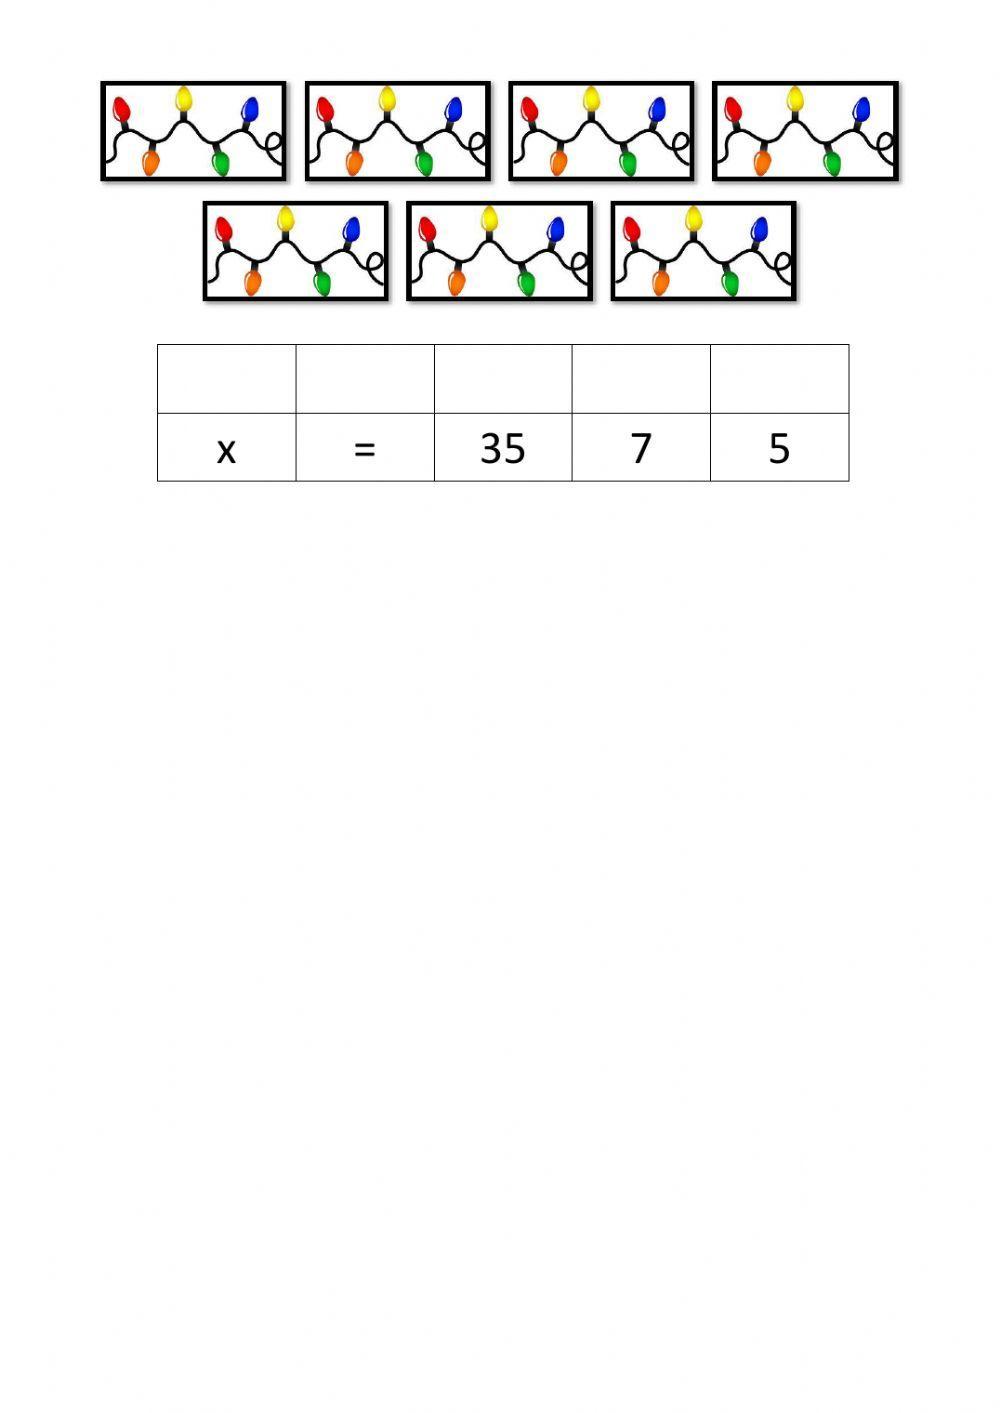 Unsclambing multiplications